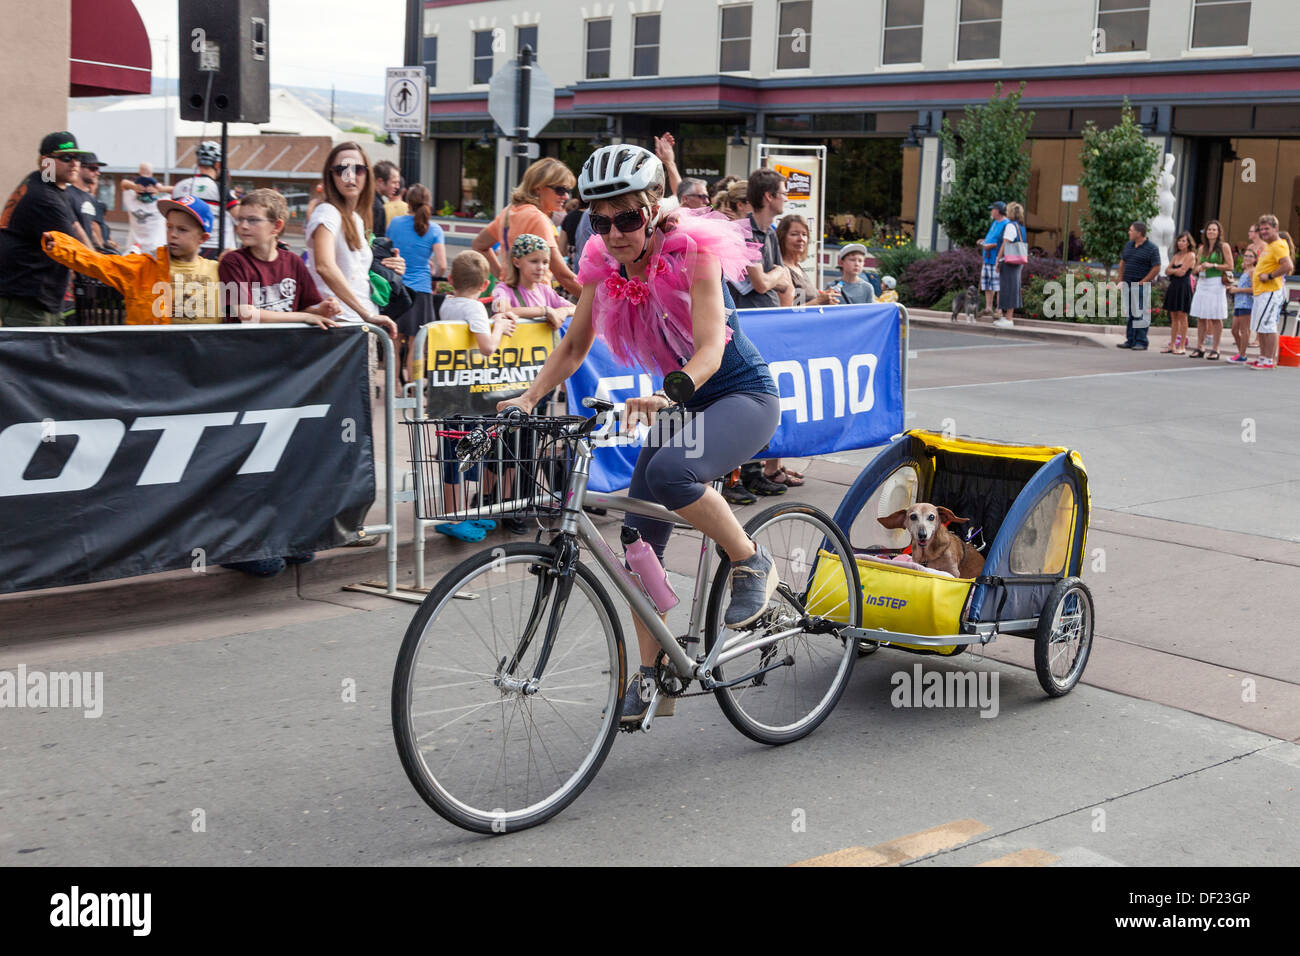 Cyclist in fancy dress taking part in the annual Charity cycle race, Grand Junction, Colorado, USA Stock Photo